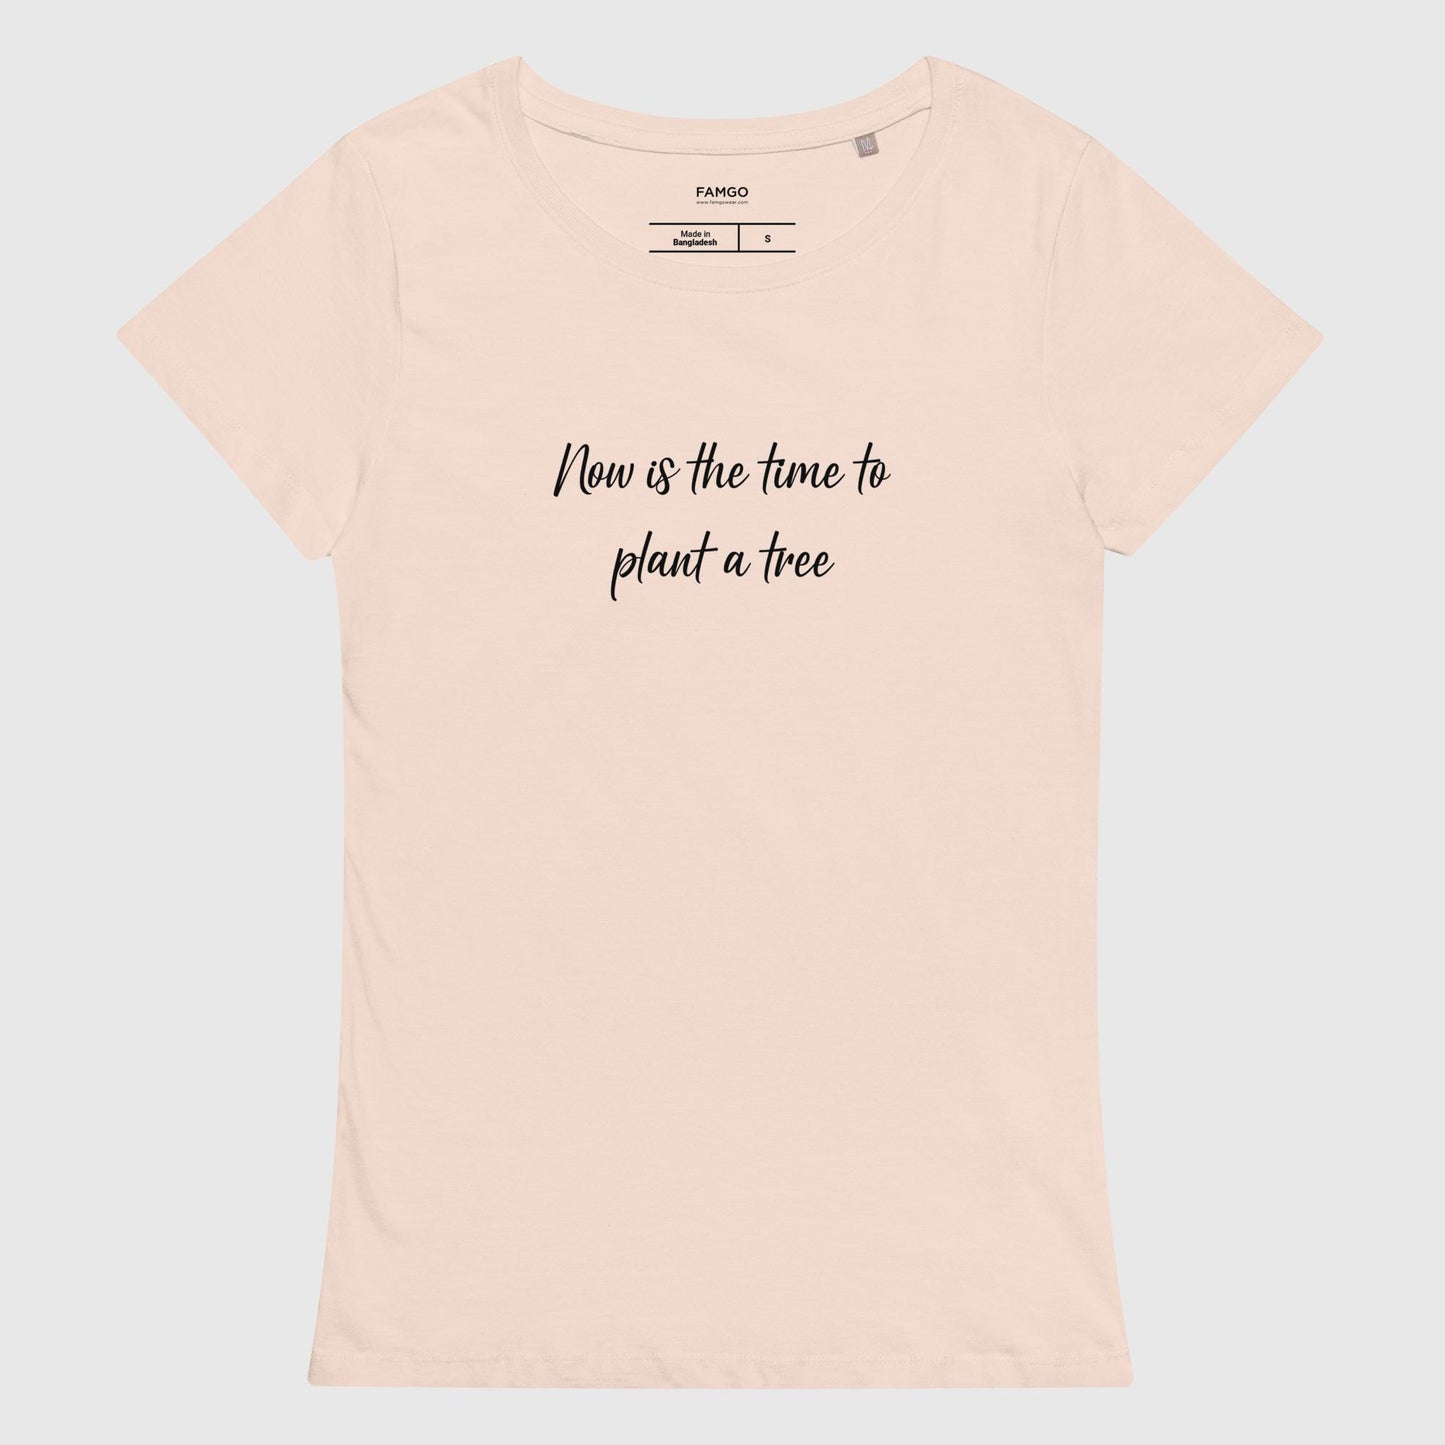 Women's creamy pink organic cotton t-shirt that features, "Now is the time to plant a tree,' inspired by the Chinese proverb, "The best time to plant a tree was 20 years ago. The second best time is now."